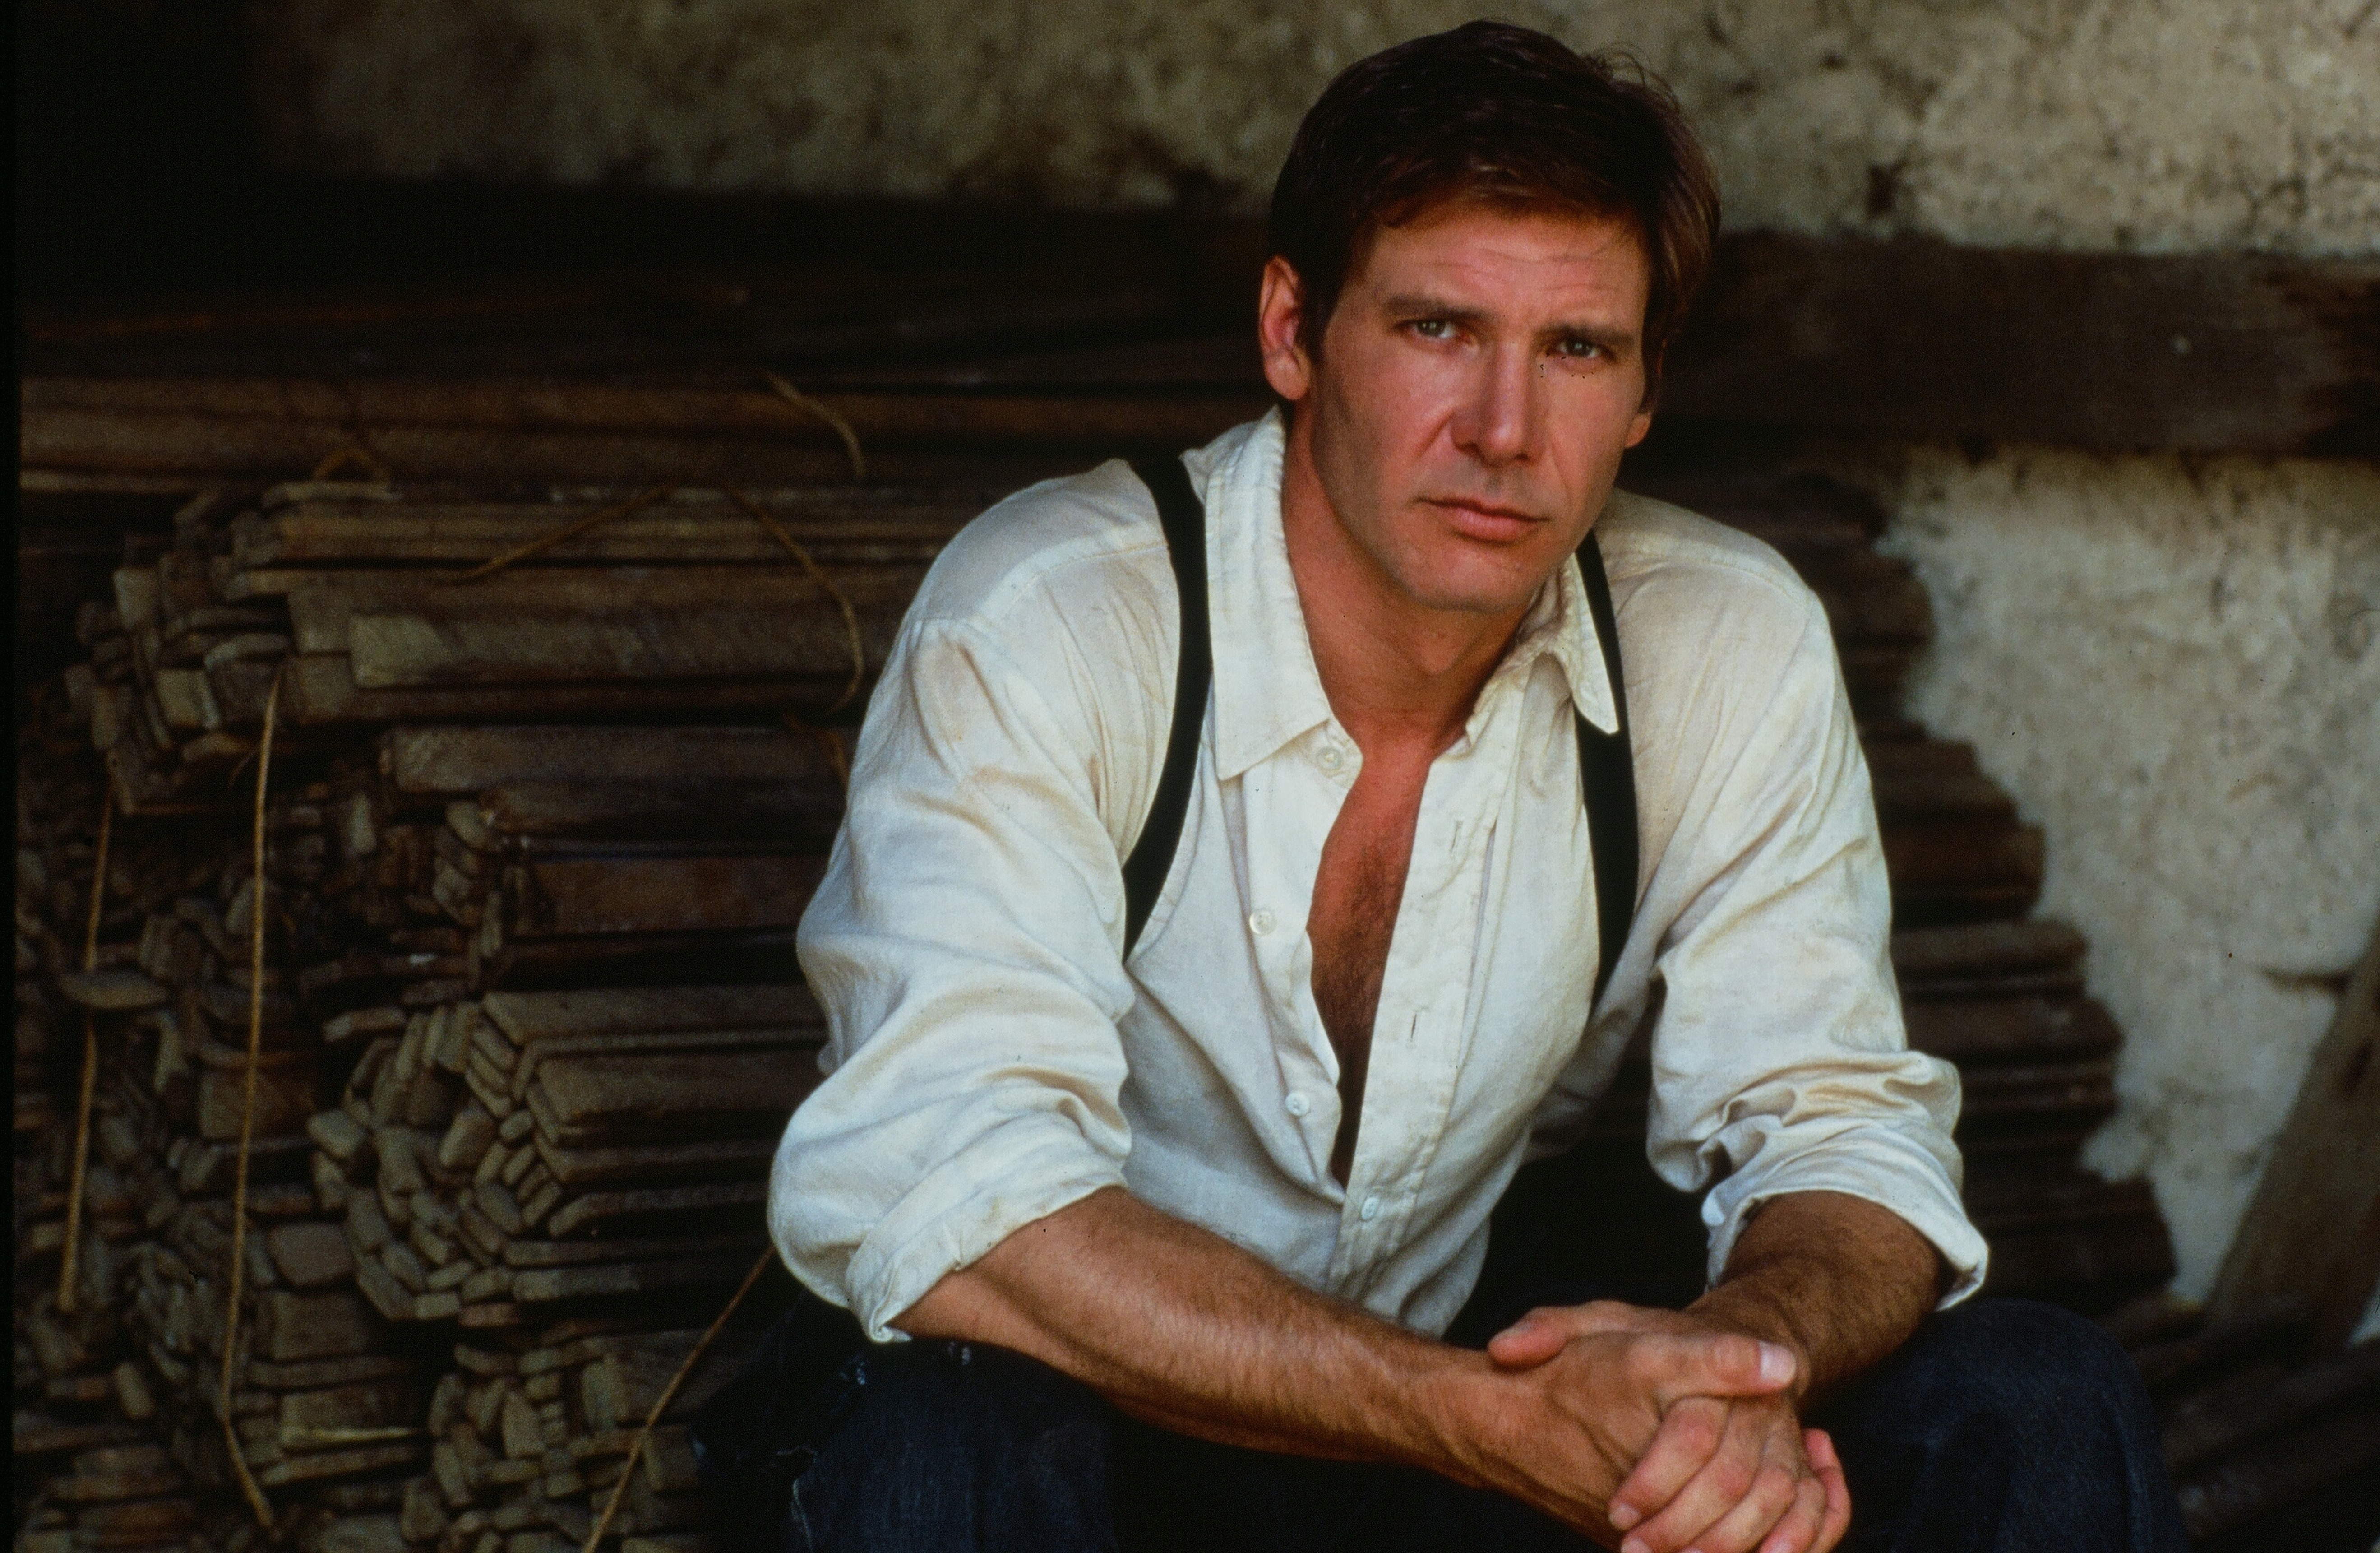 Young Harrison Ford